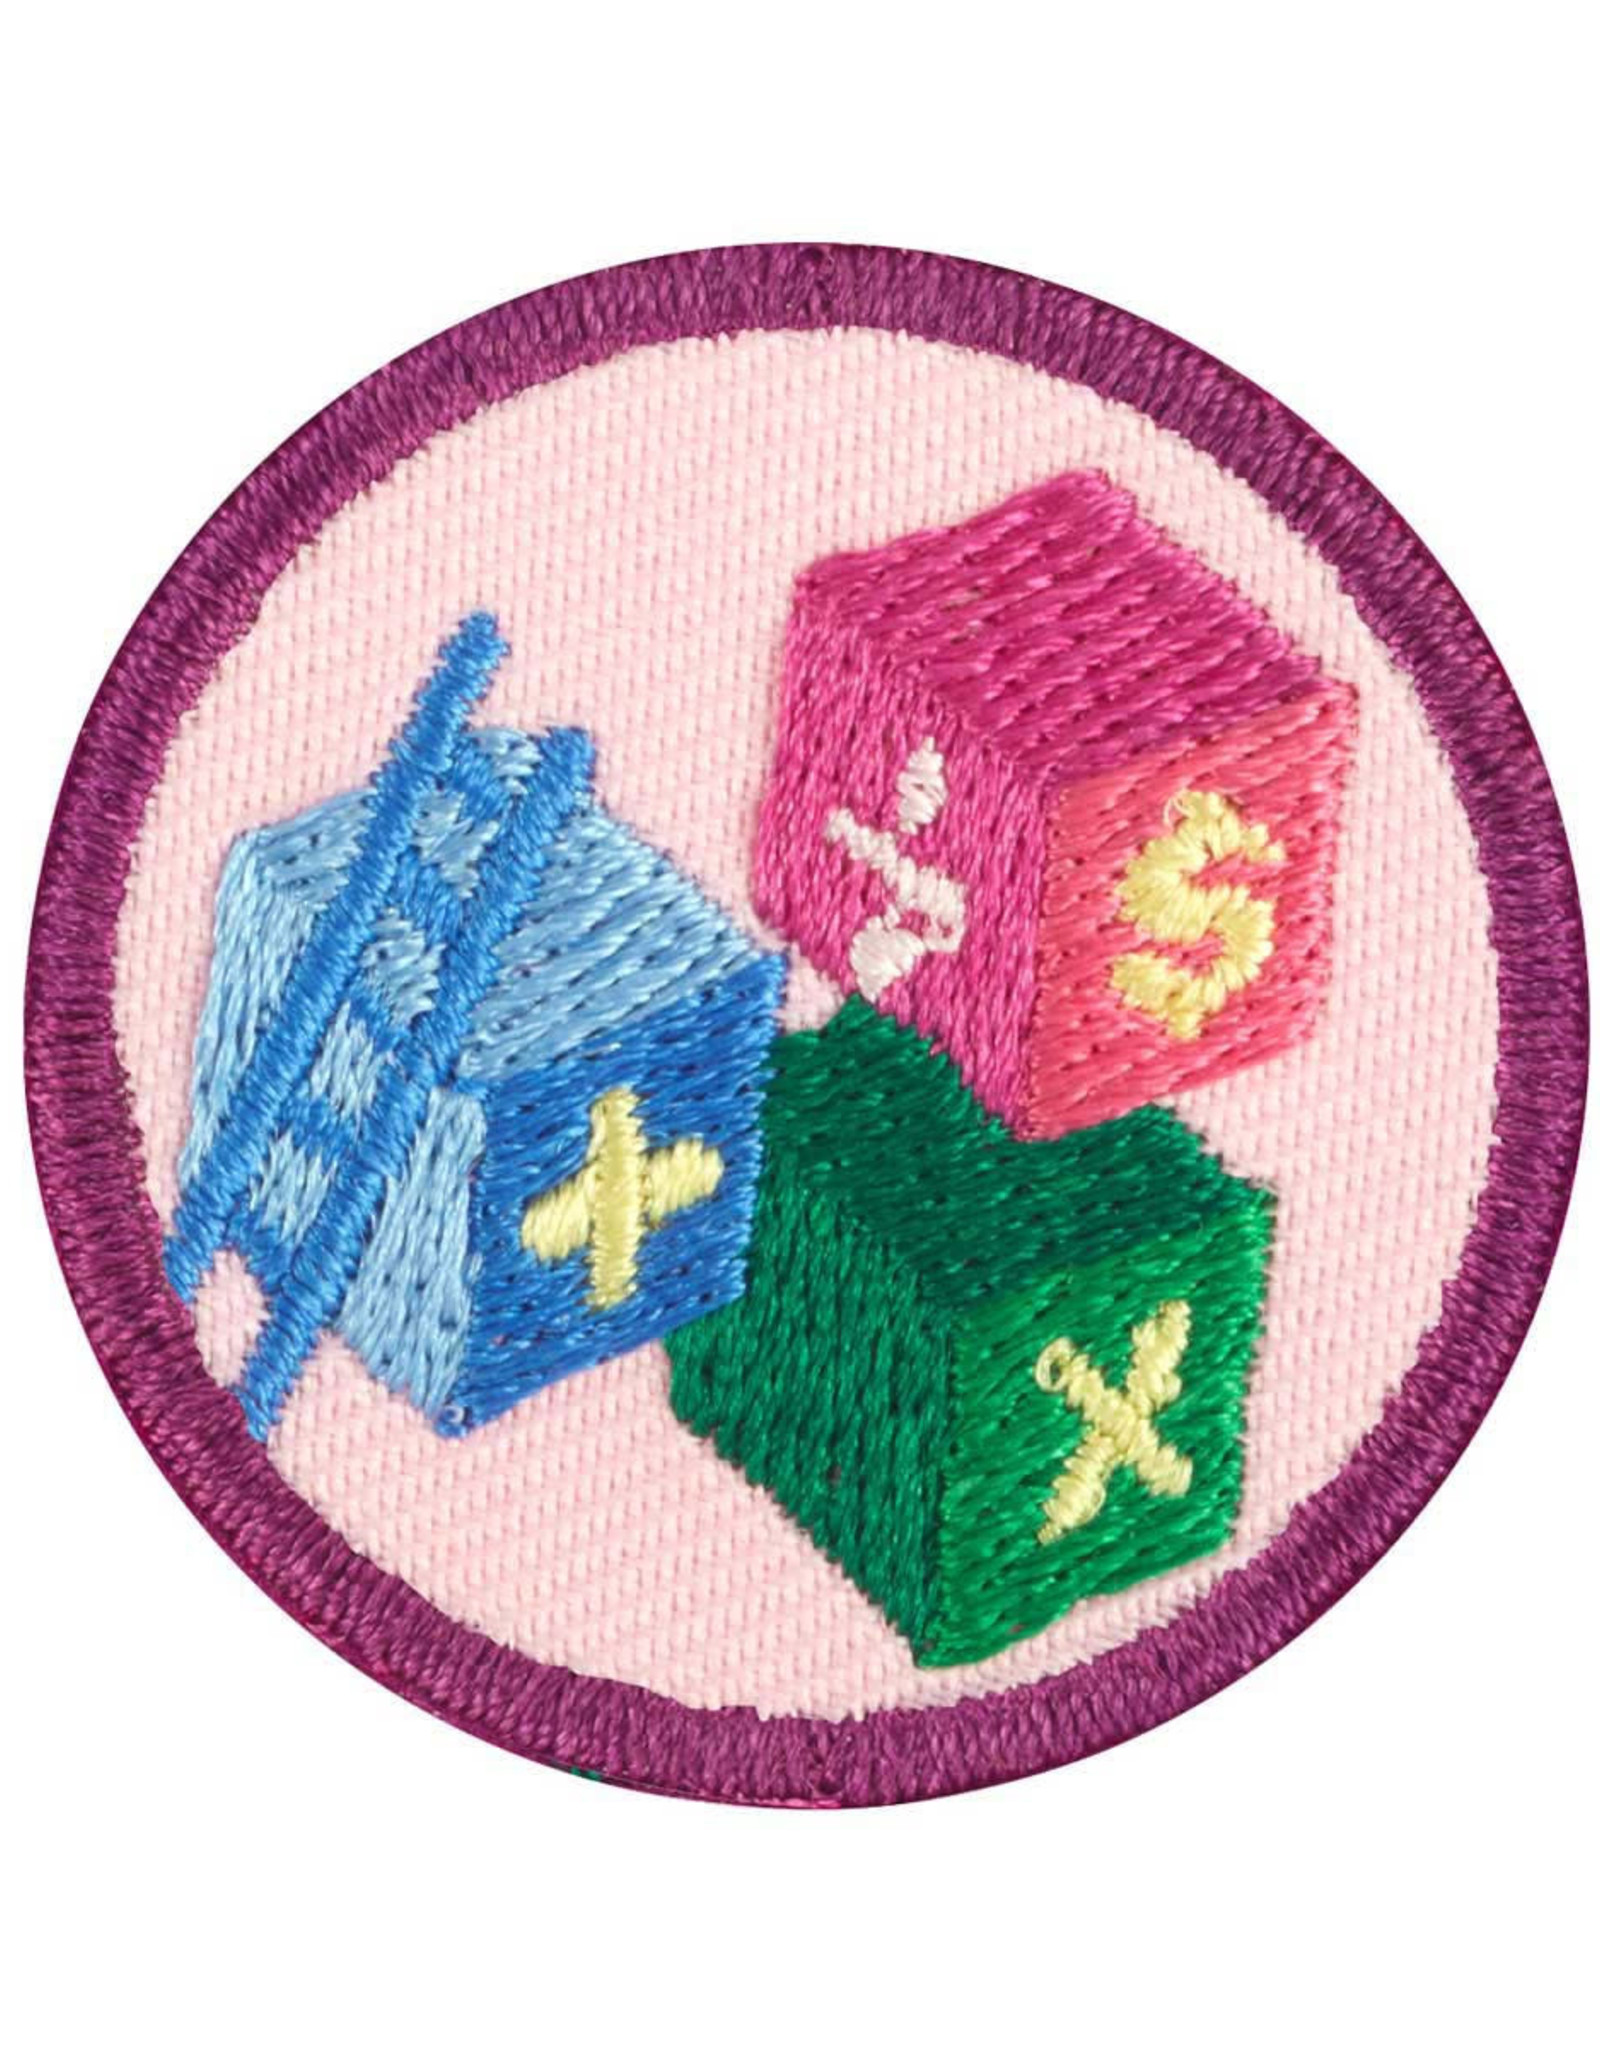 GIRL SCOUTS OF THE USA Junior Budget Maker Badge